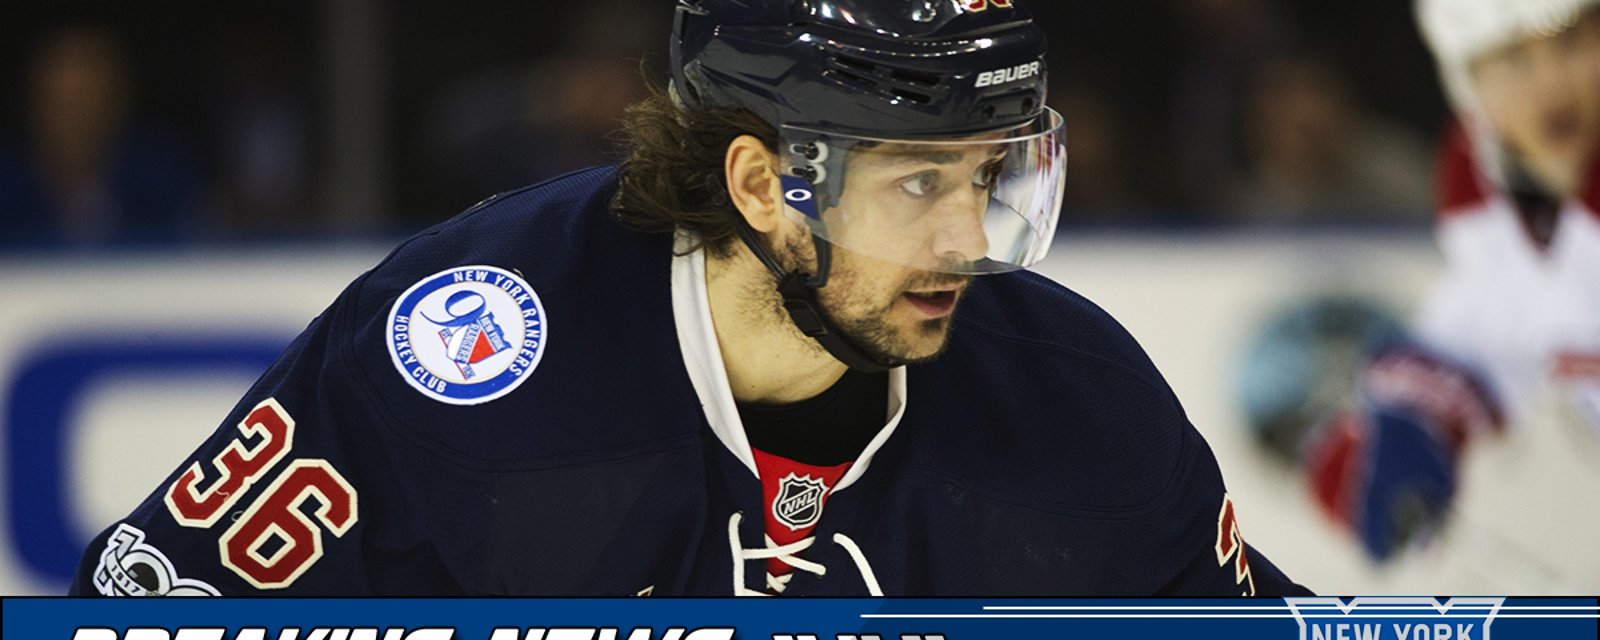 Matt Zuccarello unvealed custom skates for the Stanley Cup Payoffs.